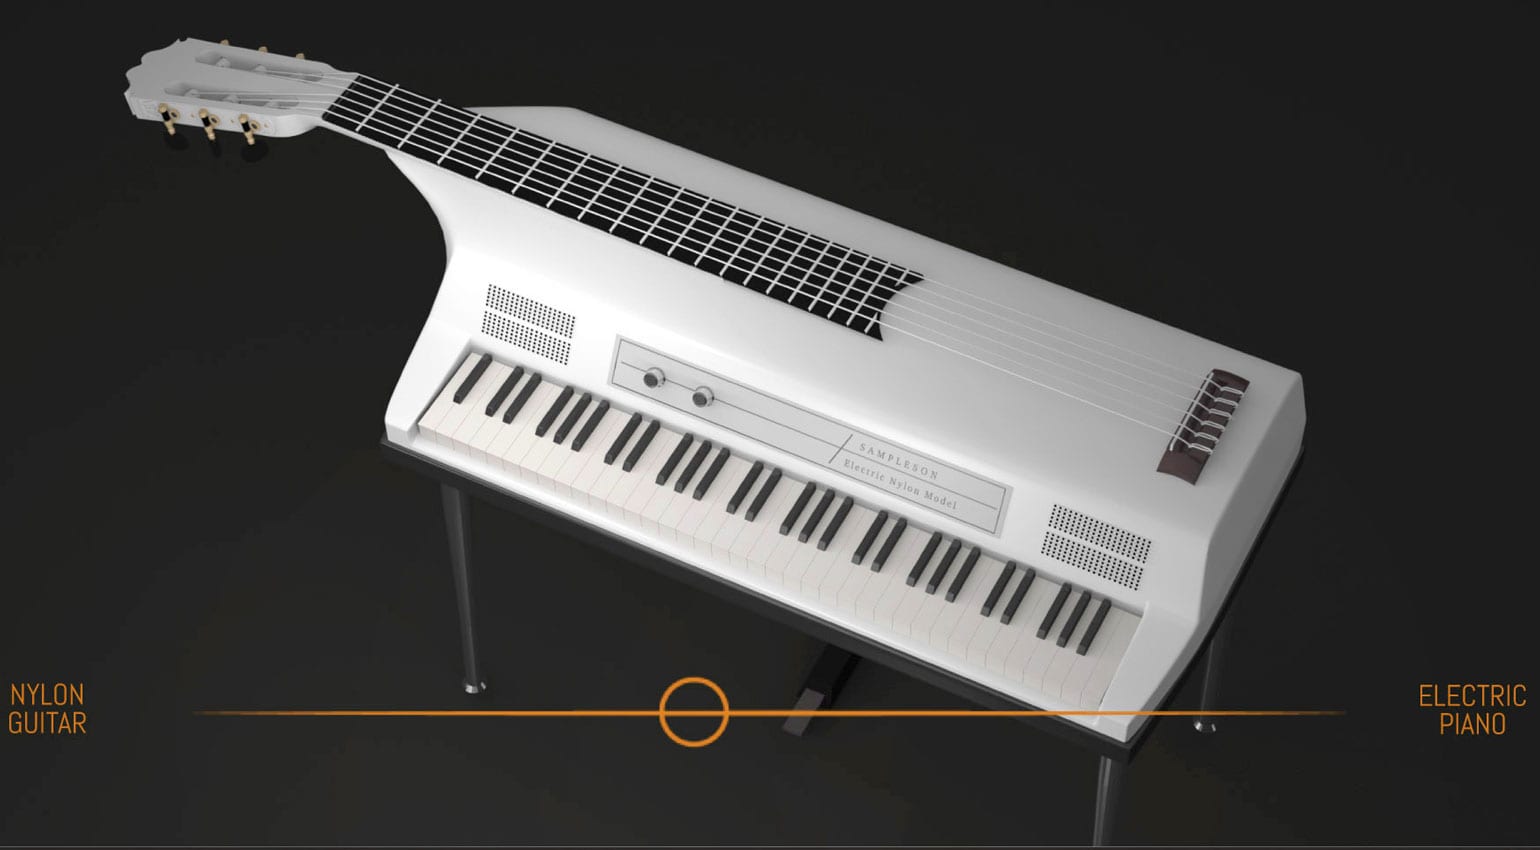 Lækker disk Nat sted ElectroNylon weird looking nylon guitar/electric piano hybrid virtual  instrument - gearnews.com